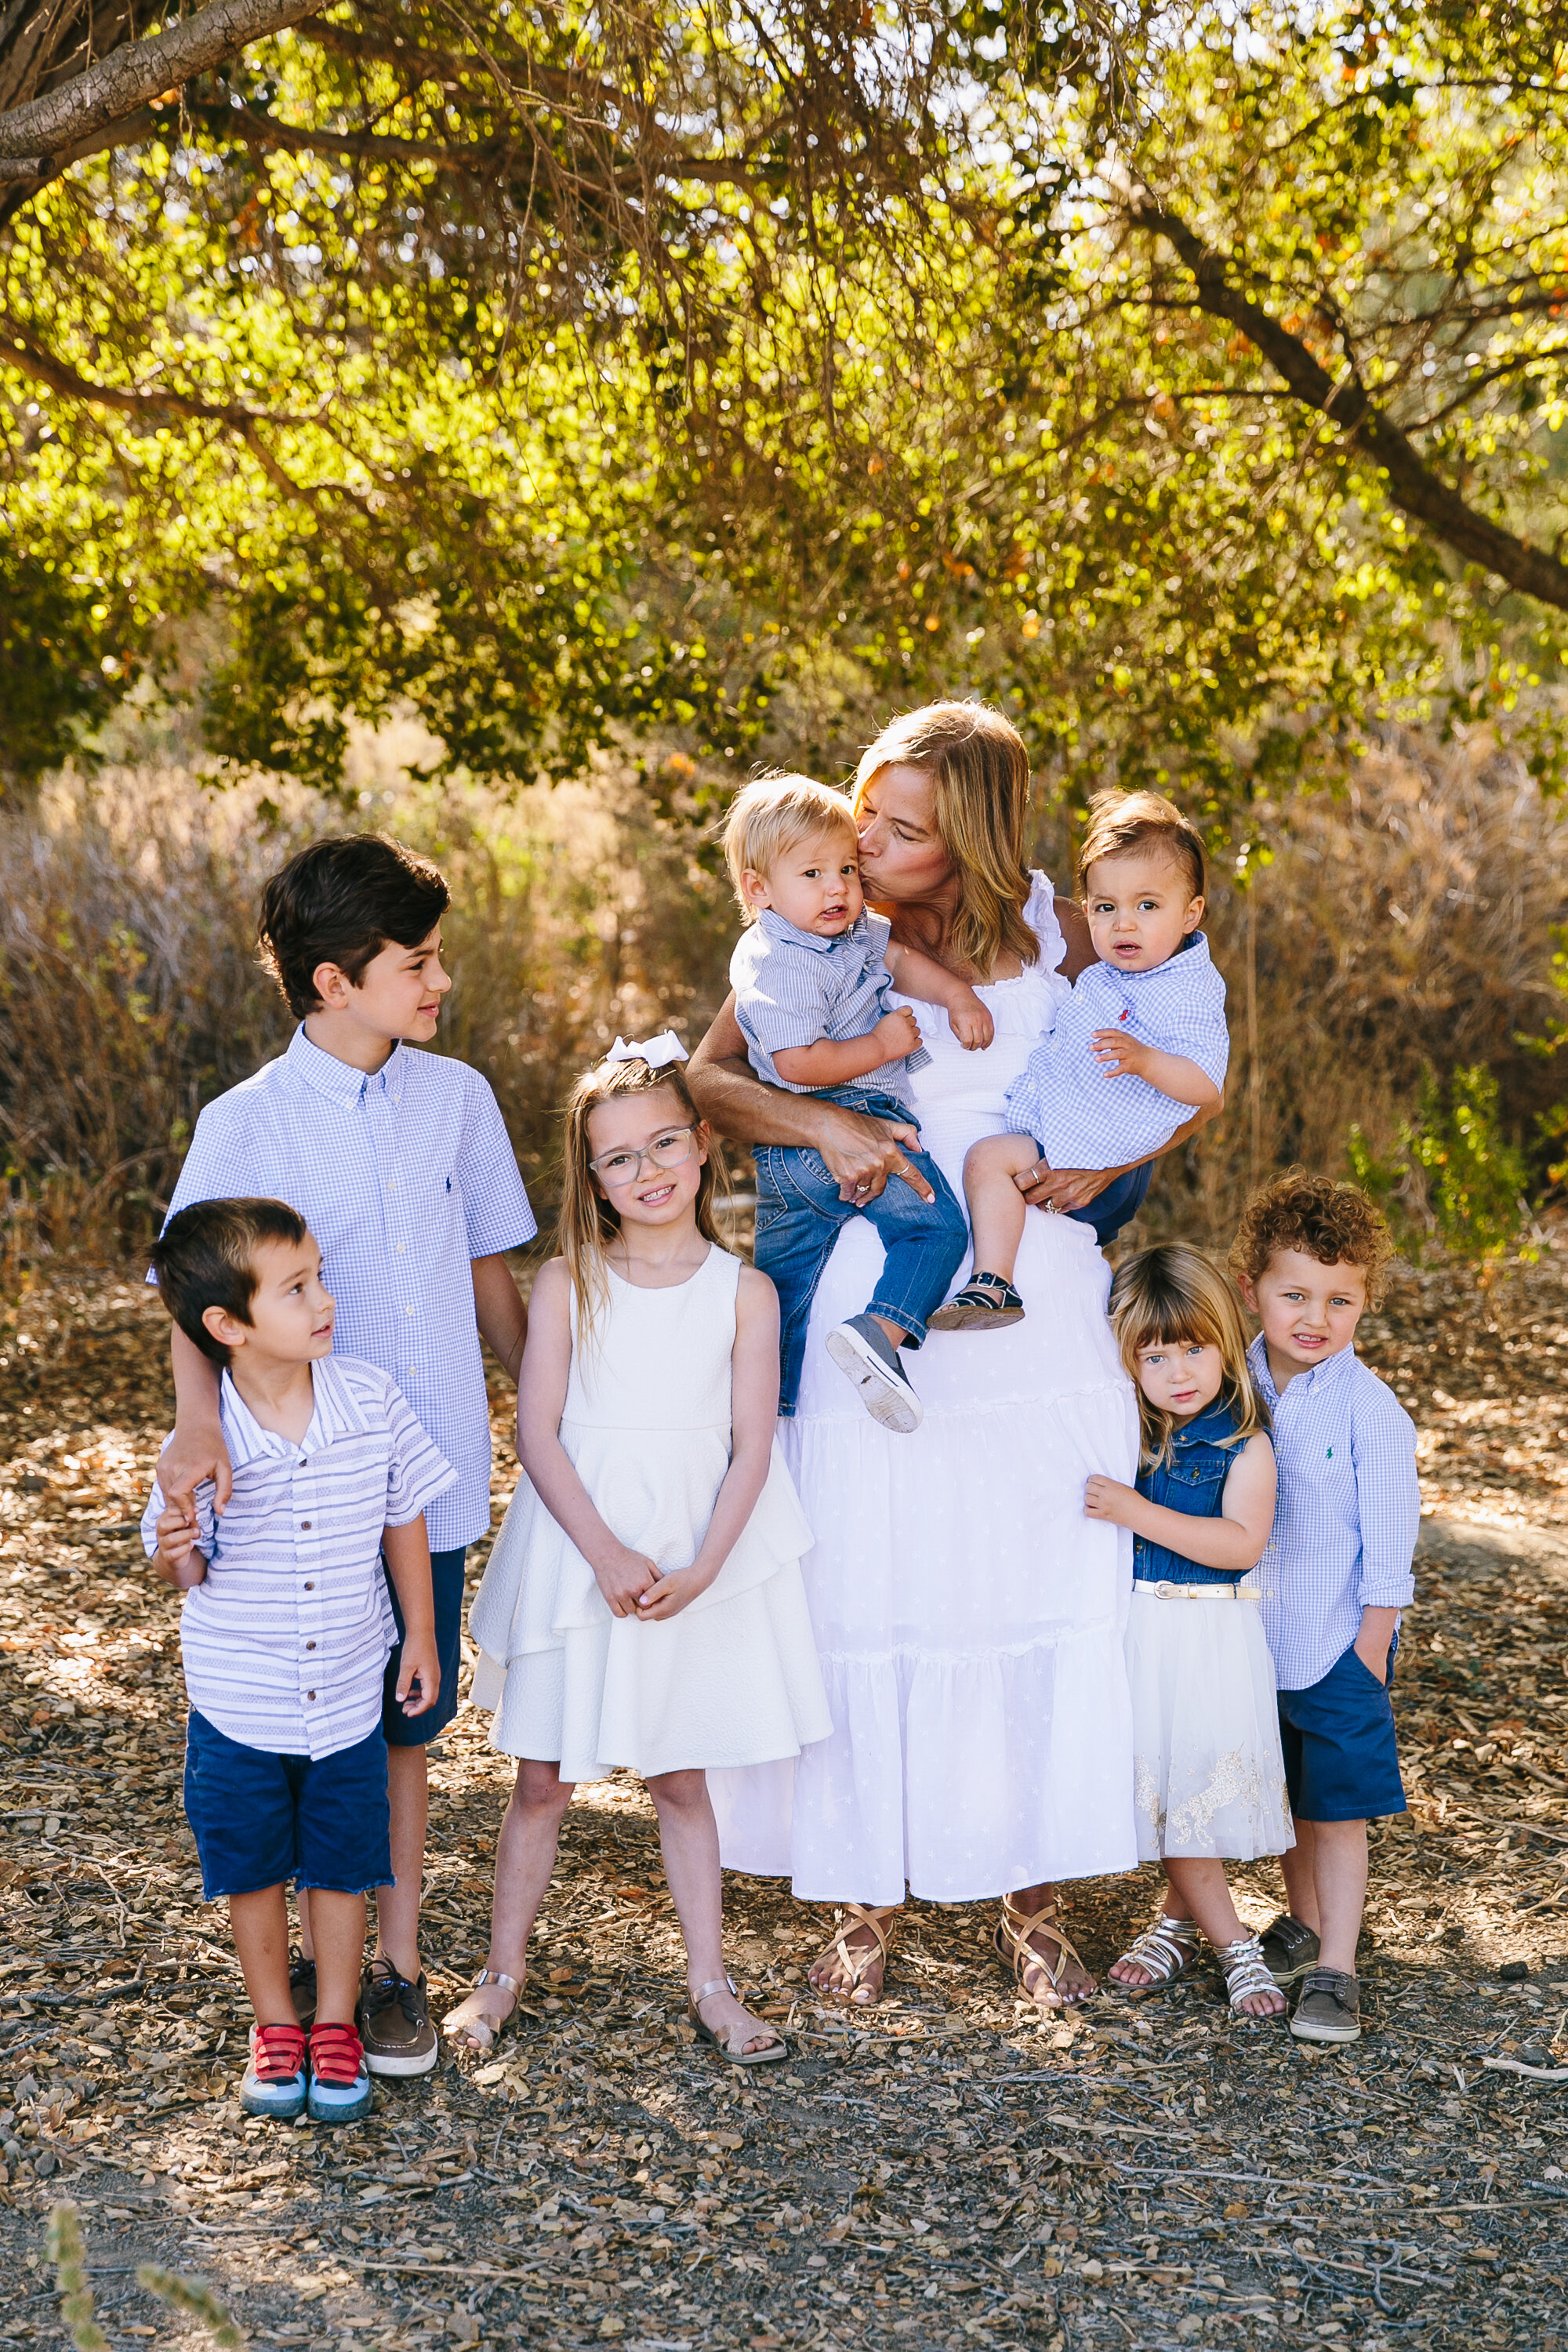 Los_Angeles_Family_Photography_Orange_County_Children_Babies_Field_Farm_Outdoors_Morning_Session_California_Girls_Boys_Kids_Photography-0617.jpg